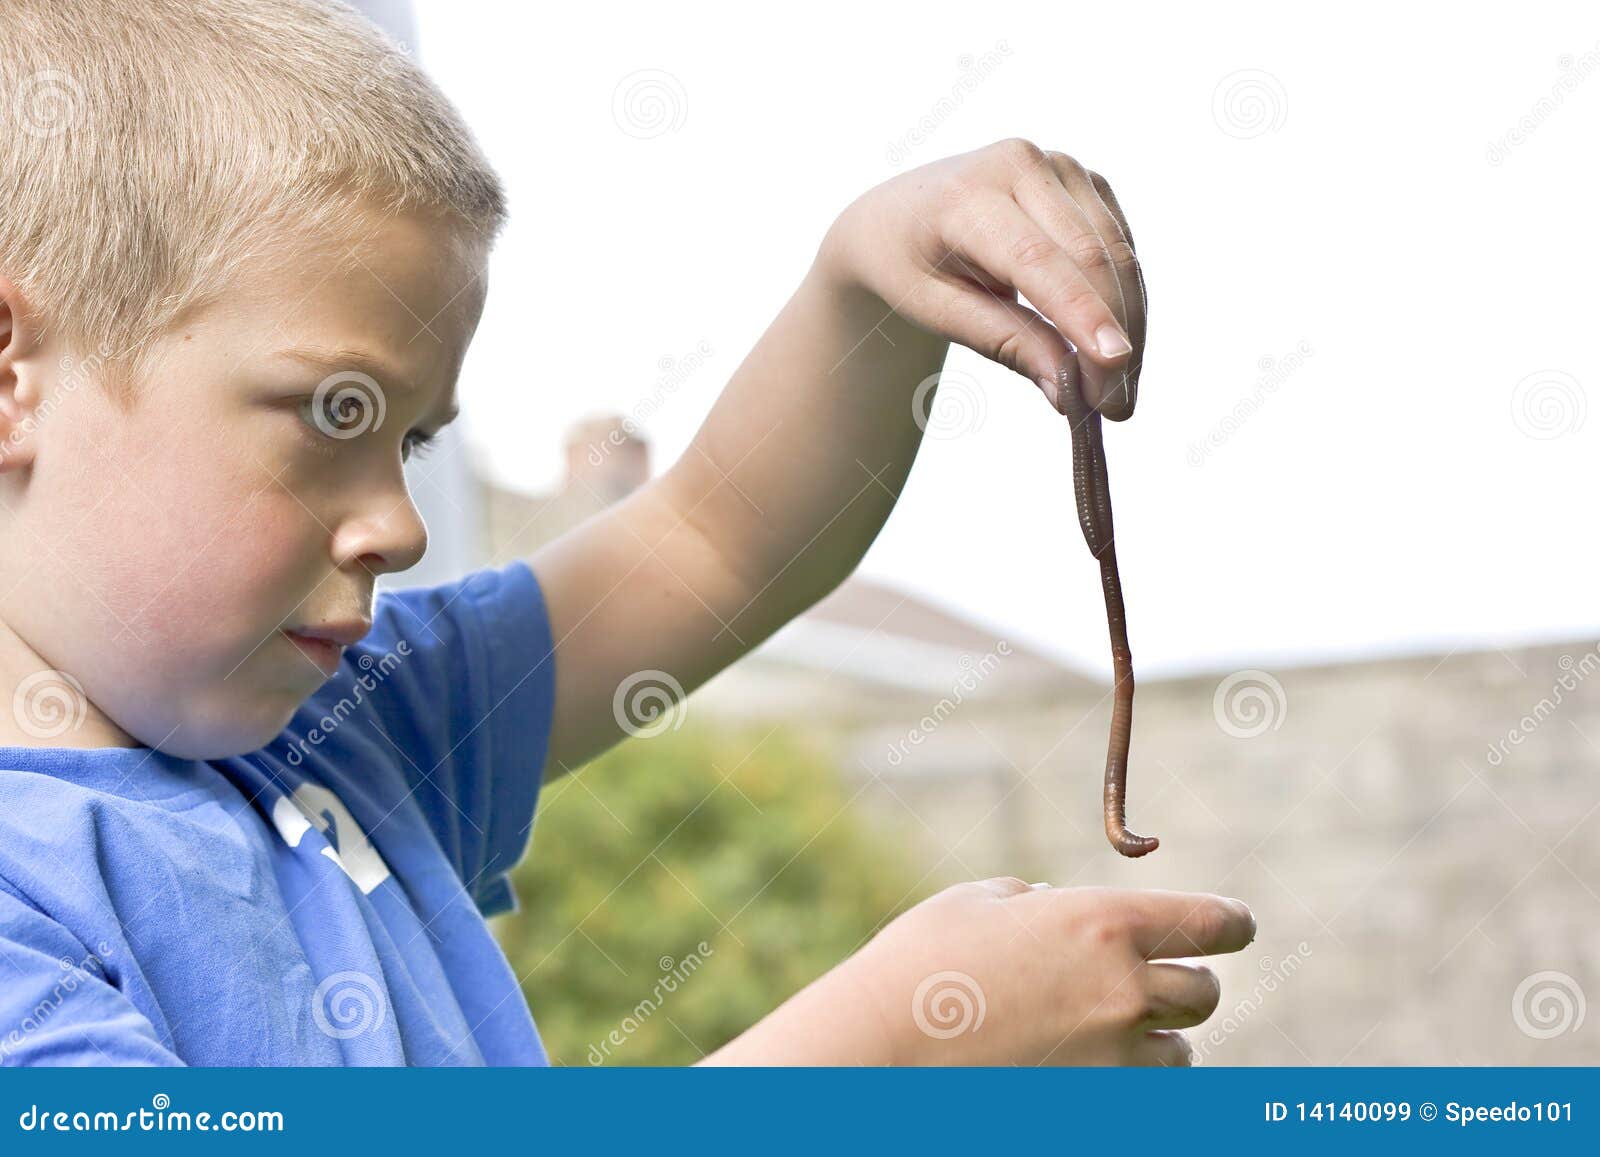 candid portrait of boy playing with a worm